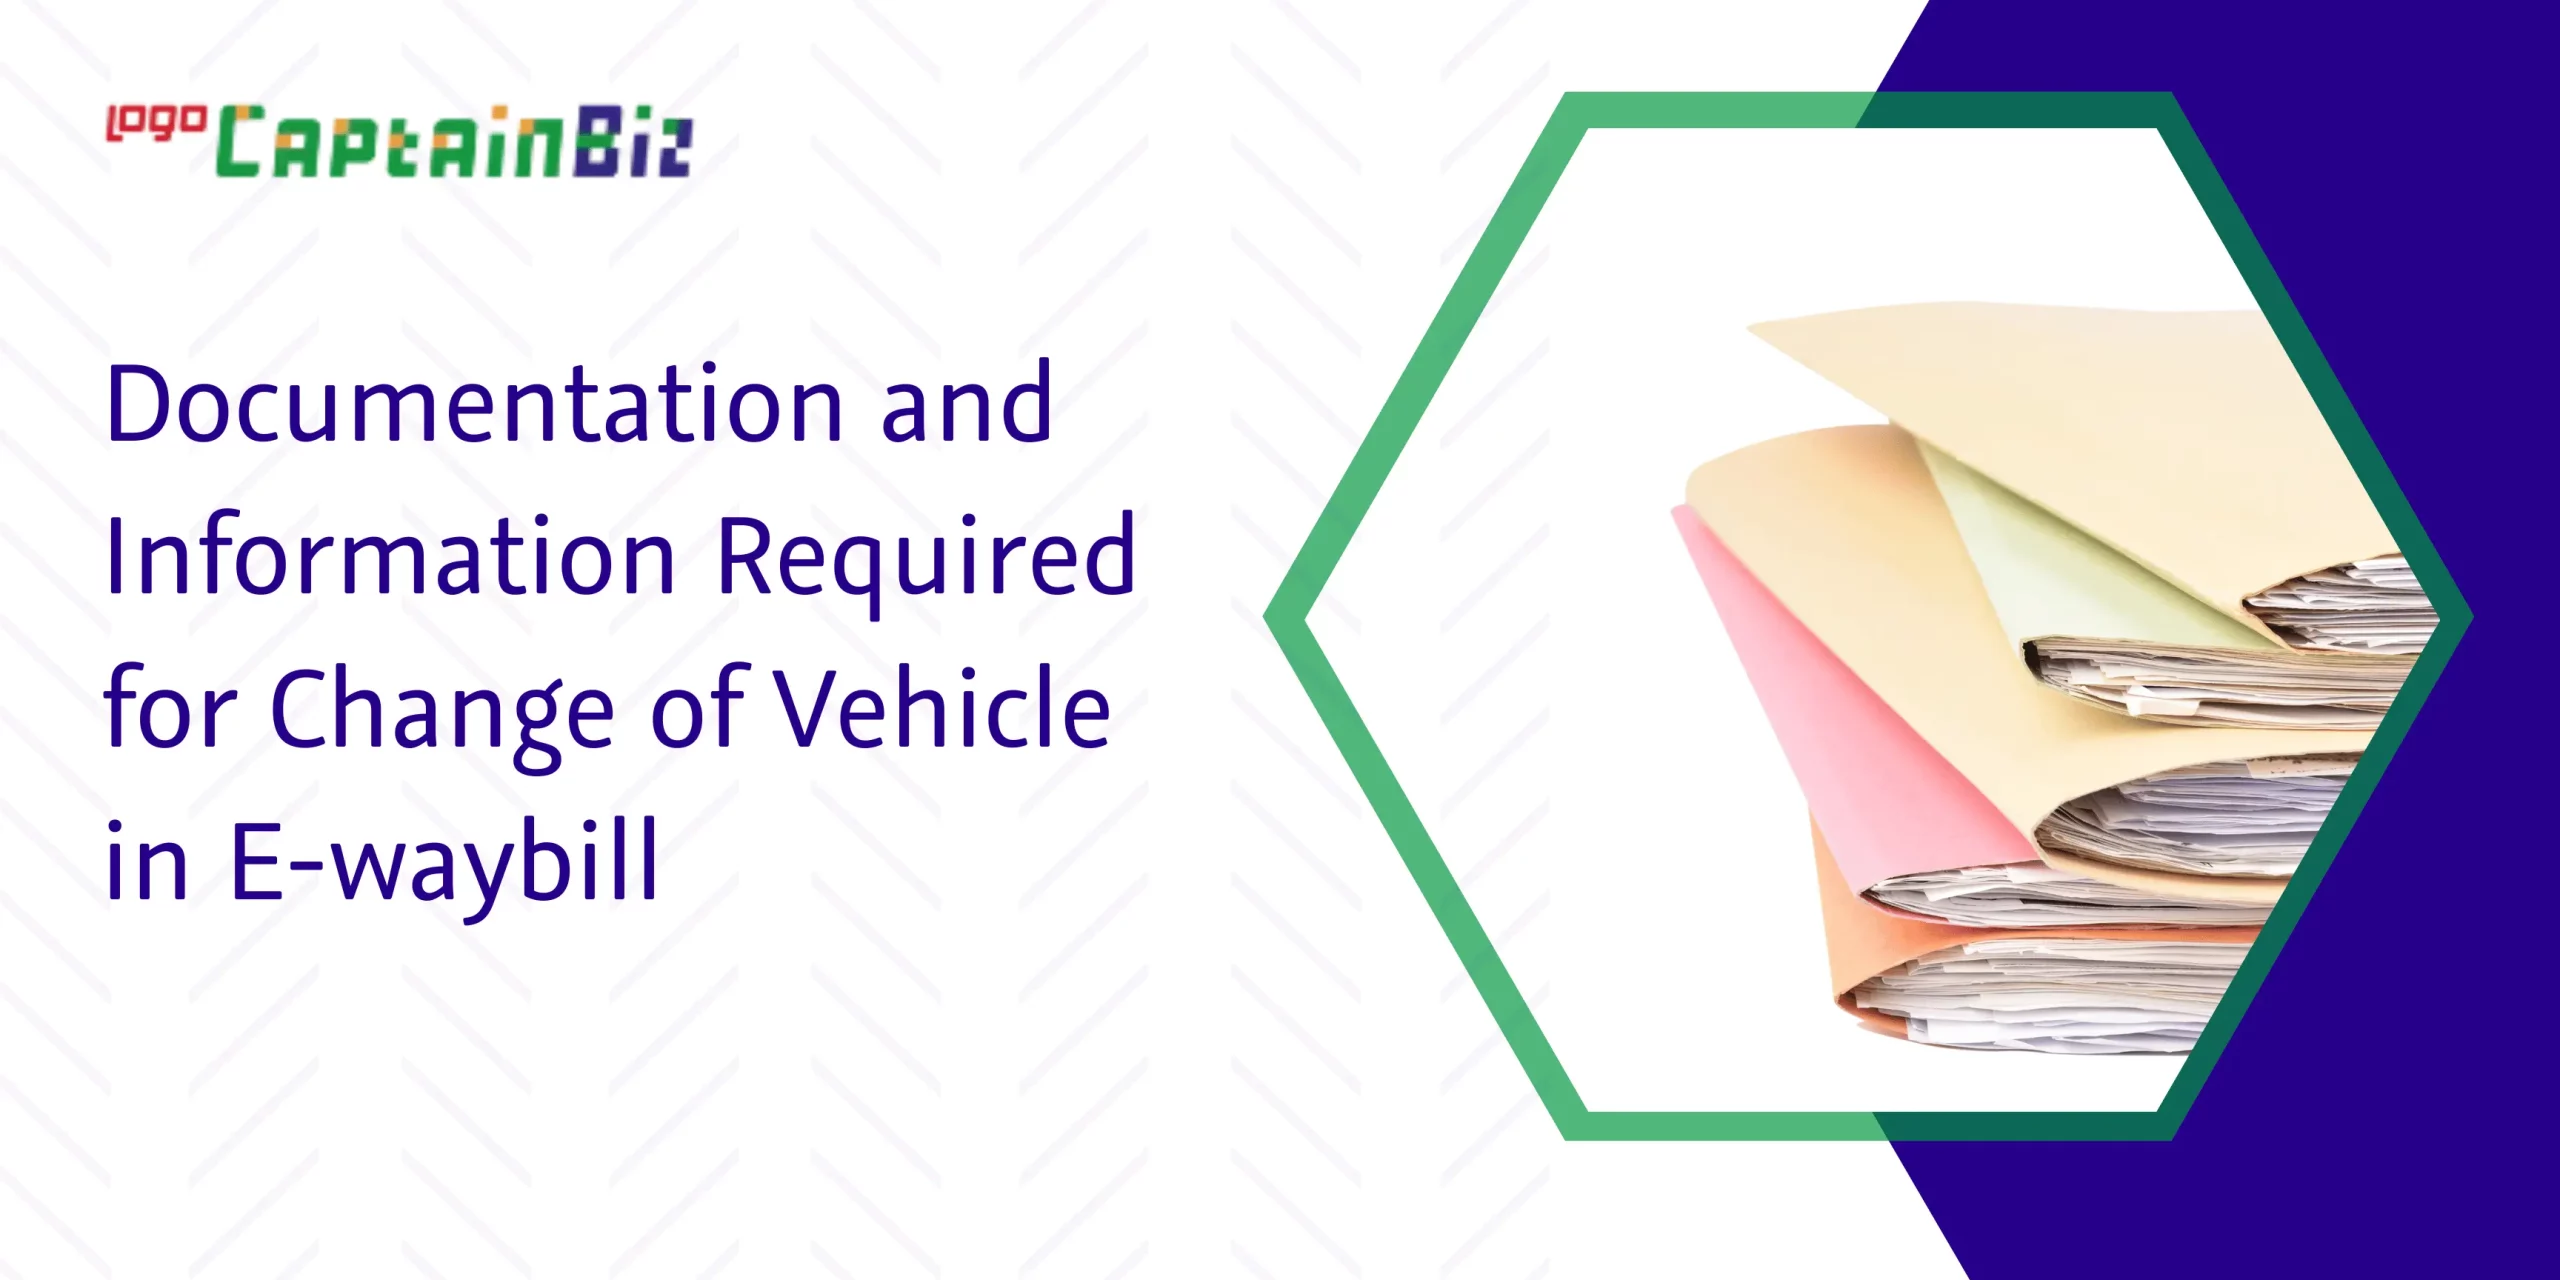 captainbiz documentation and information required for change of vehicle in e waybill